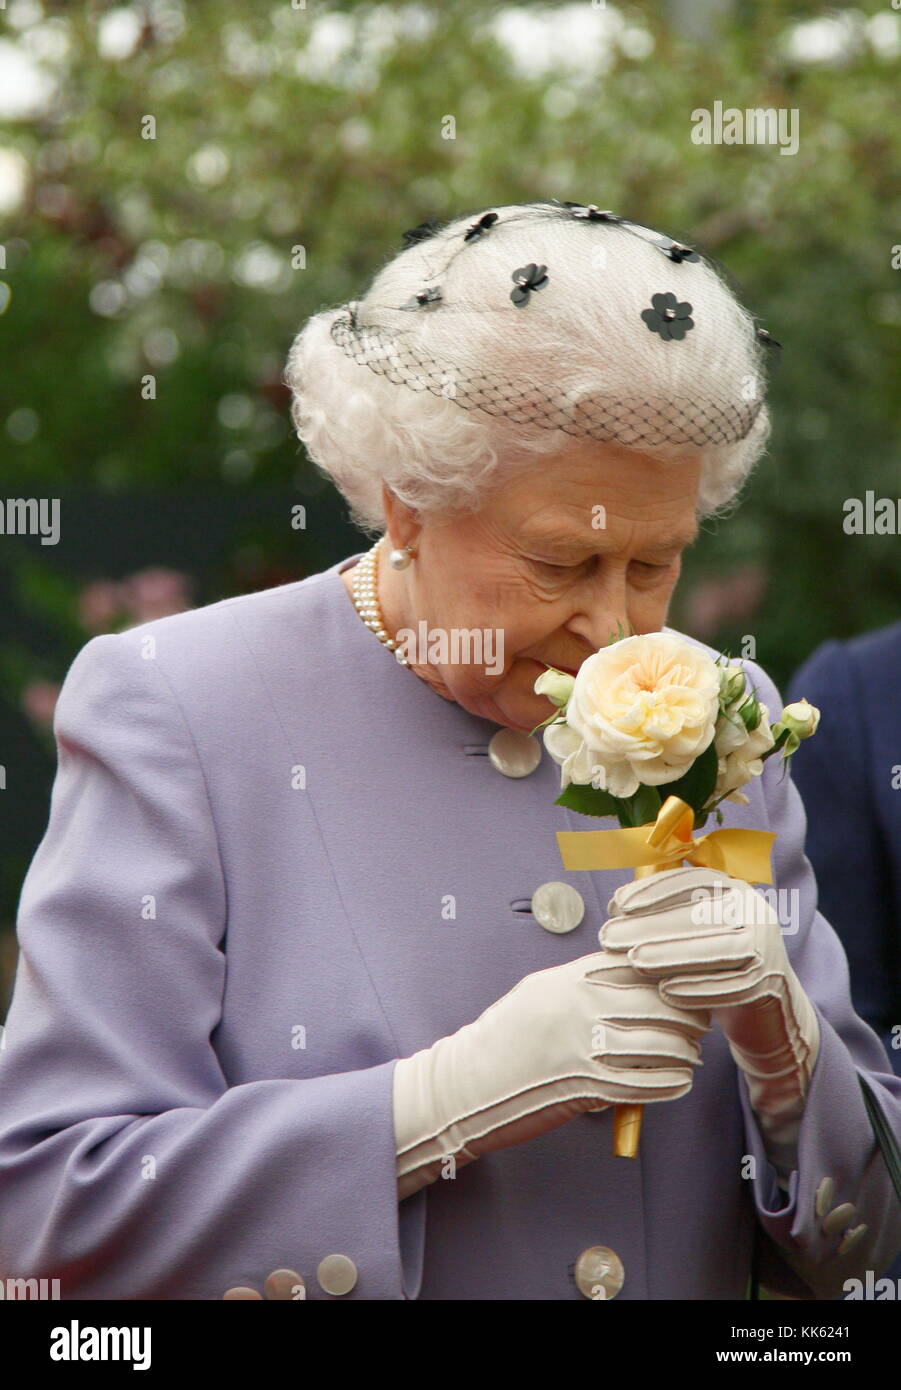 Queen Elizabeth 11 at the London Chelsea flower show 21st May 2012. Russell Moore portfolio page. Stock Photo